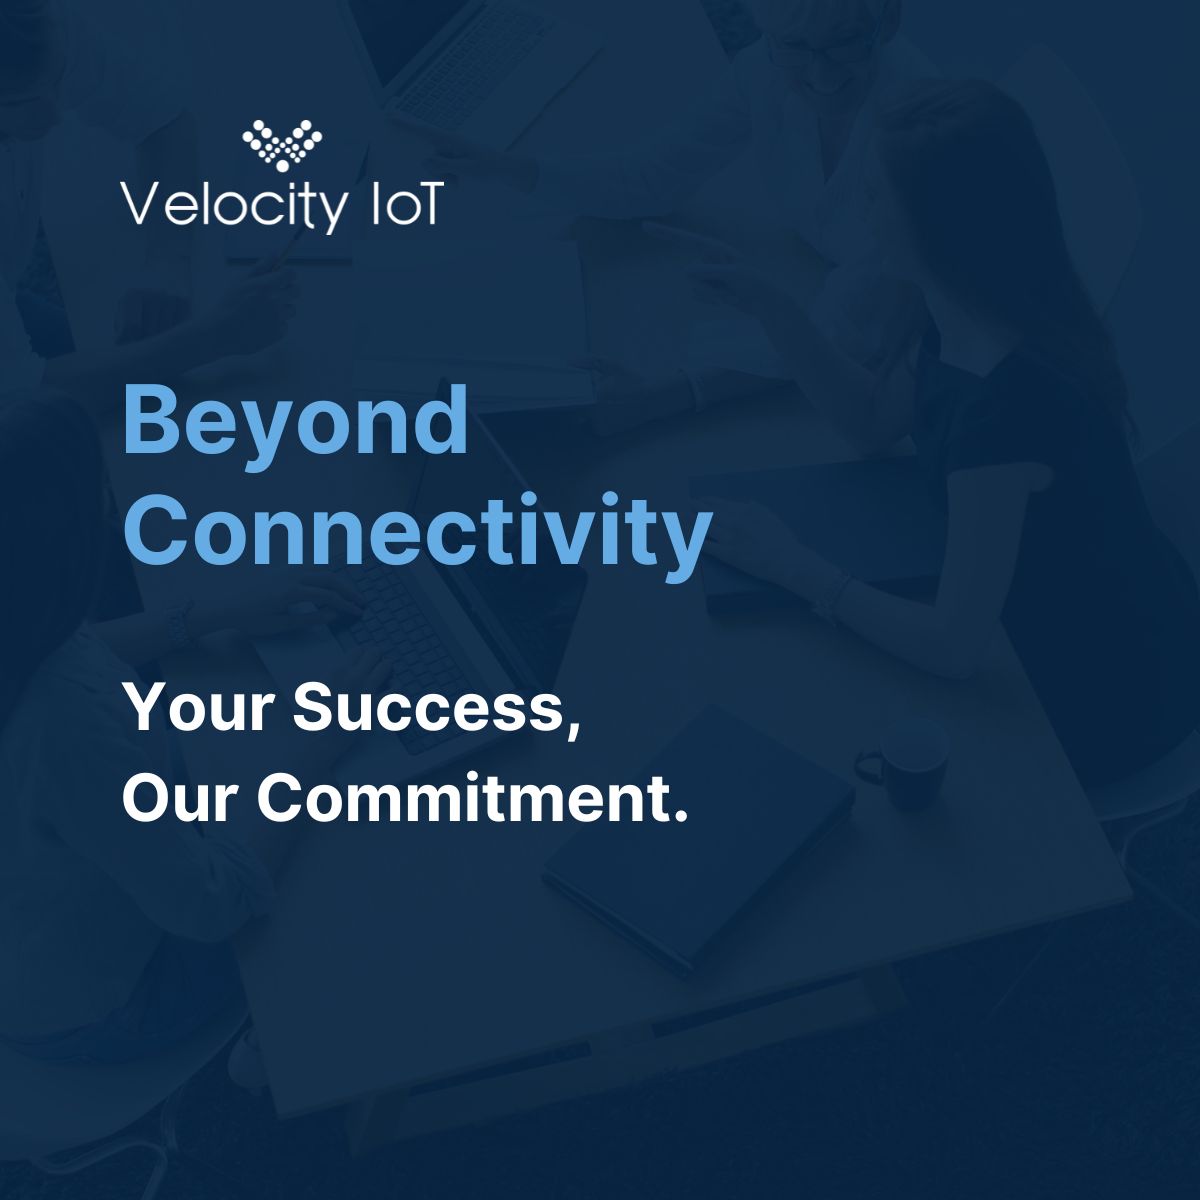 Connectivity is key in IoT solutions, and at Velocity IoT, your success is our success. We provide a partnership-based 'white glove approach' to connectivity, ensuring all services are included at no extra cost. Contact us to learn more: buff.ly/3UW45sg